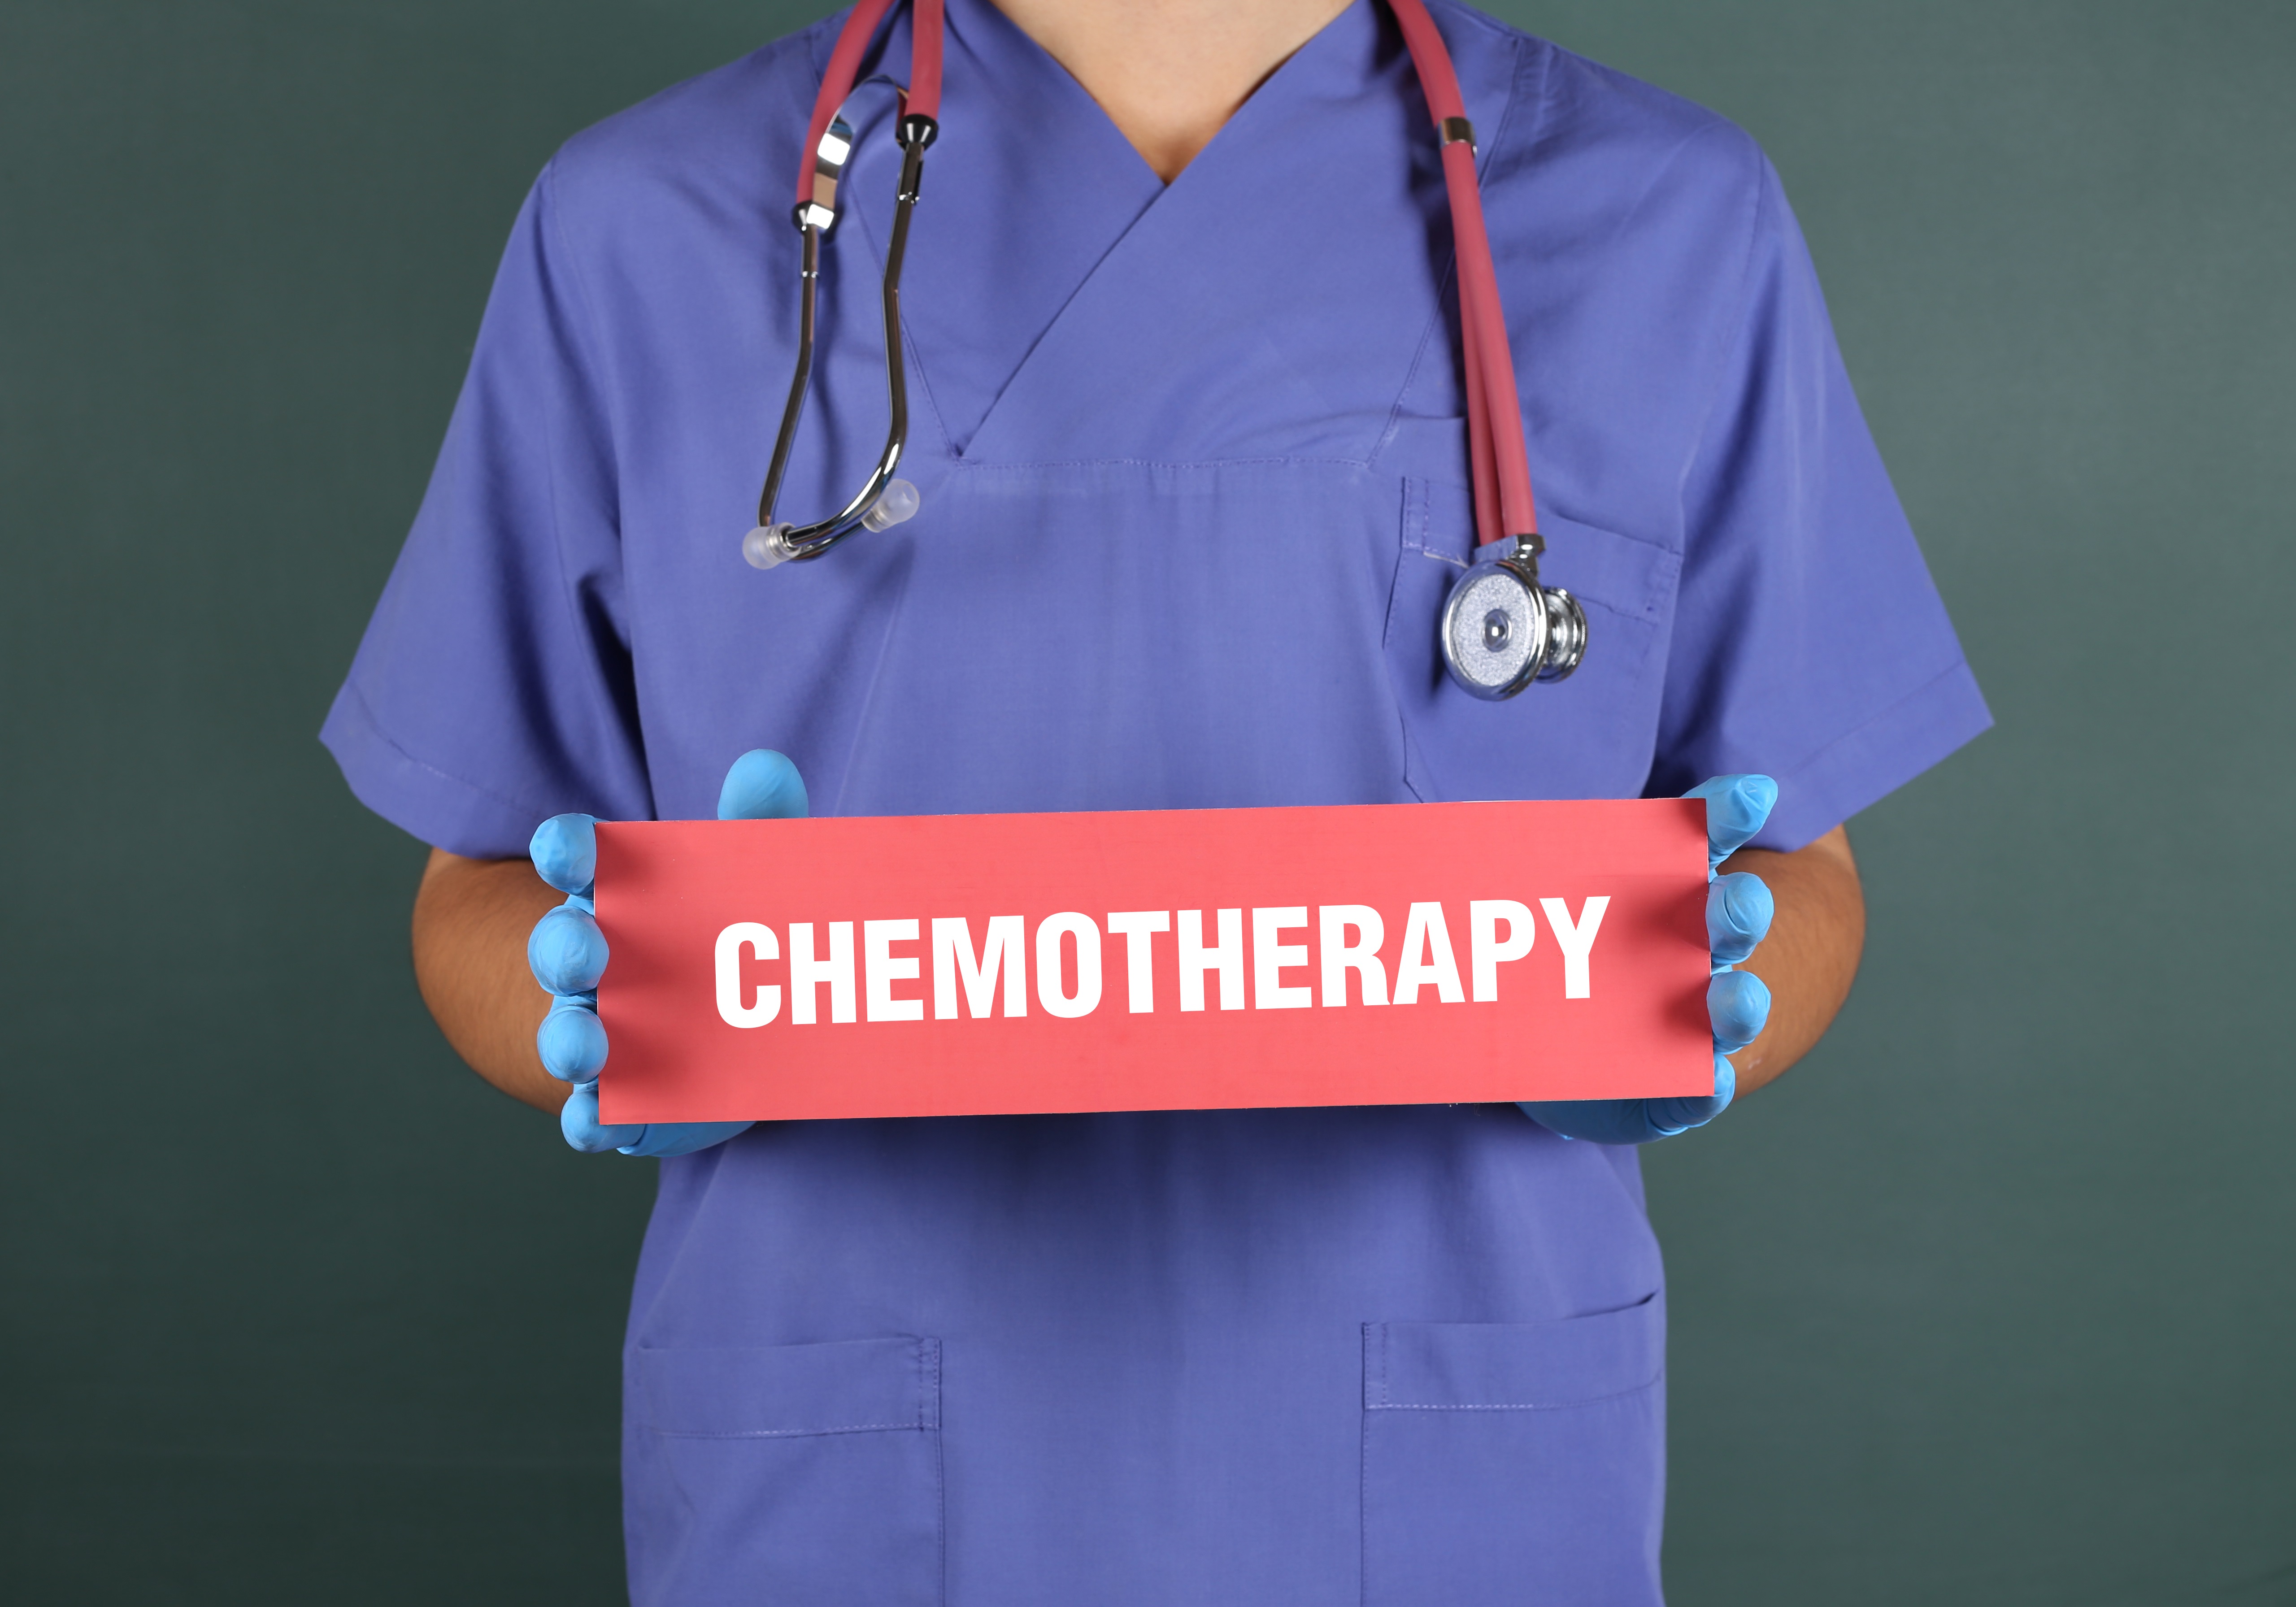 How to Prepare for Chemotherapy (with Pictures) - wikiHow